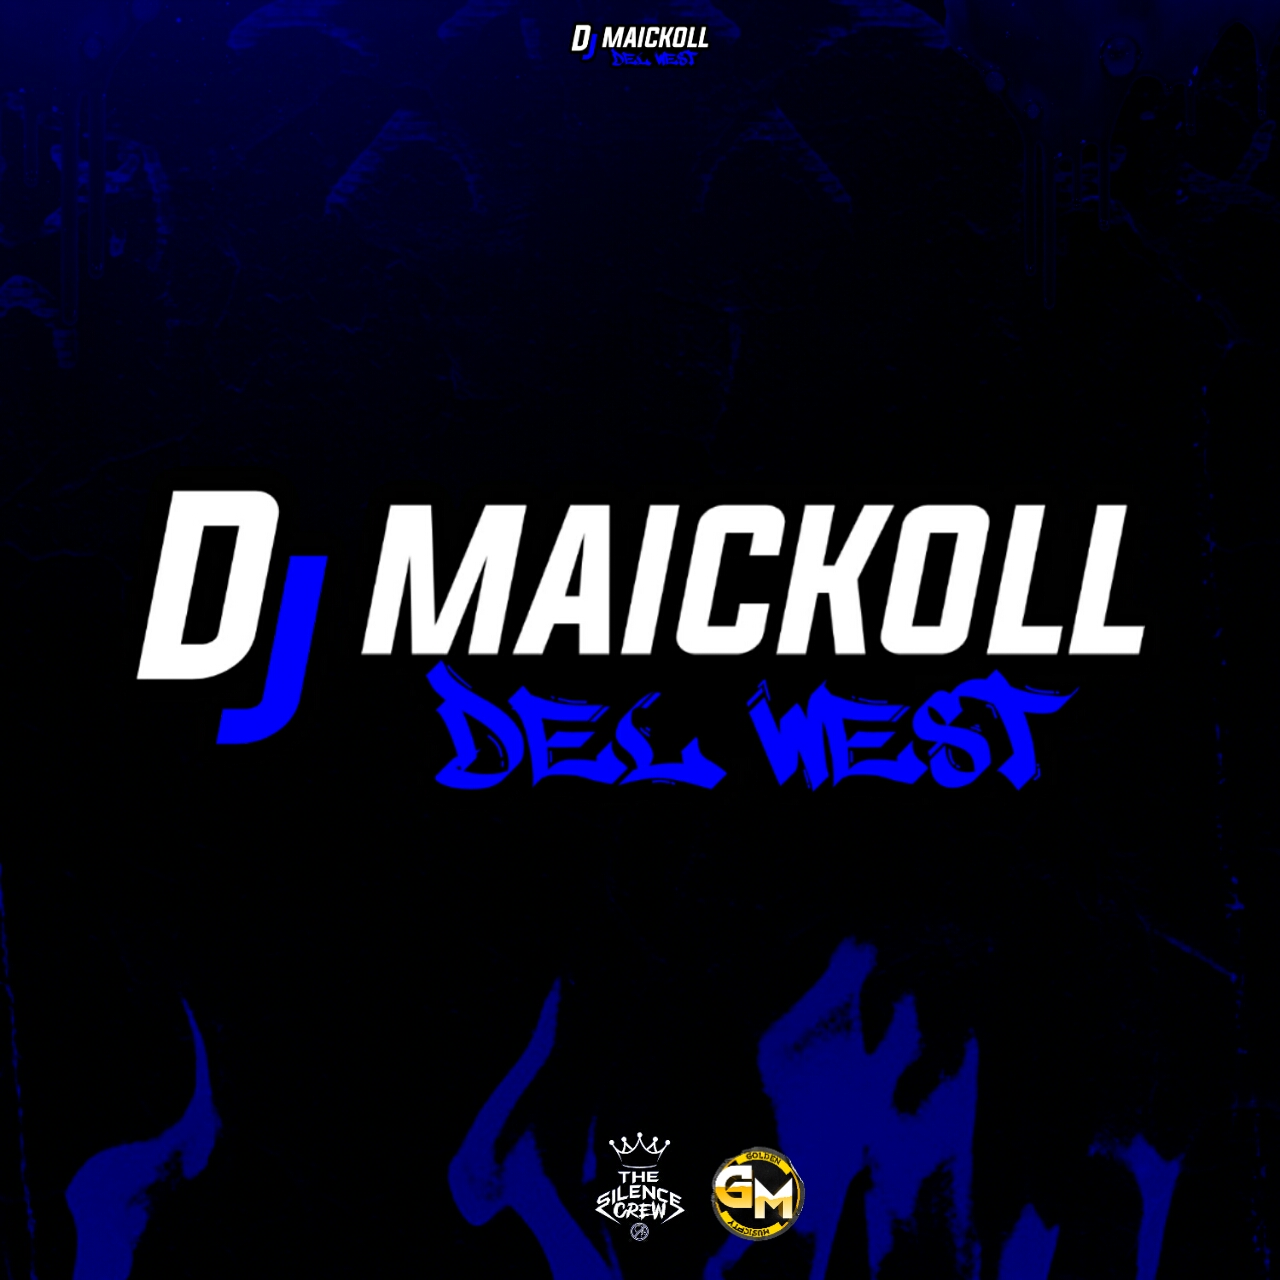 Activate Capira  Mix Tape  By Dj Maickoll Del WEST